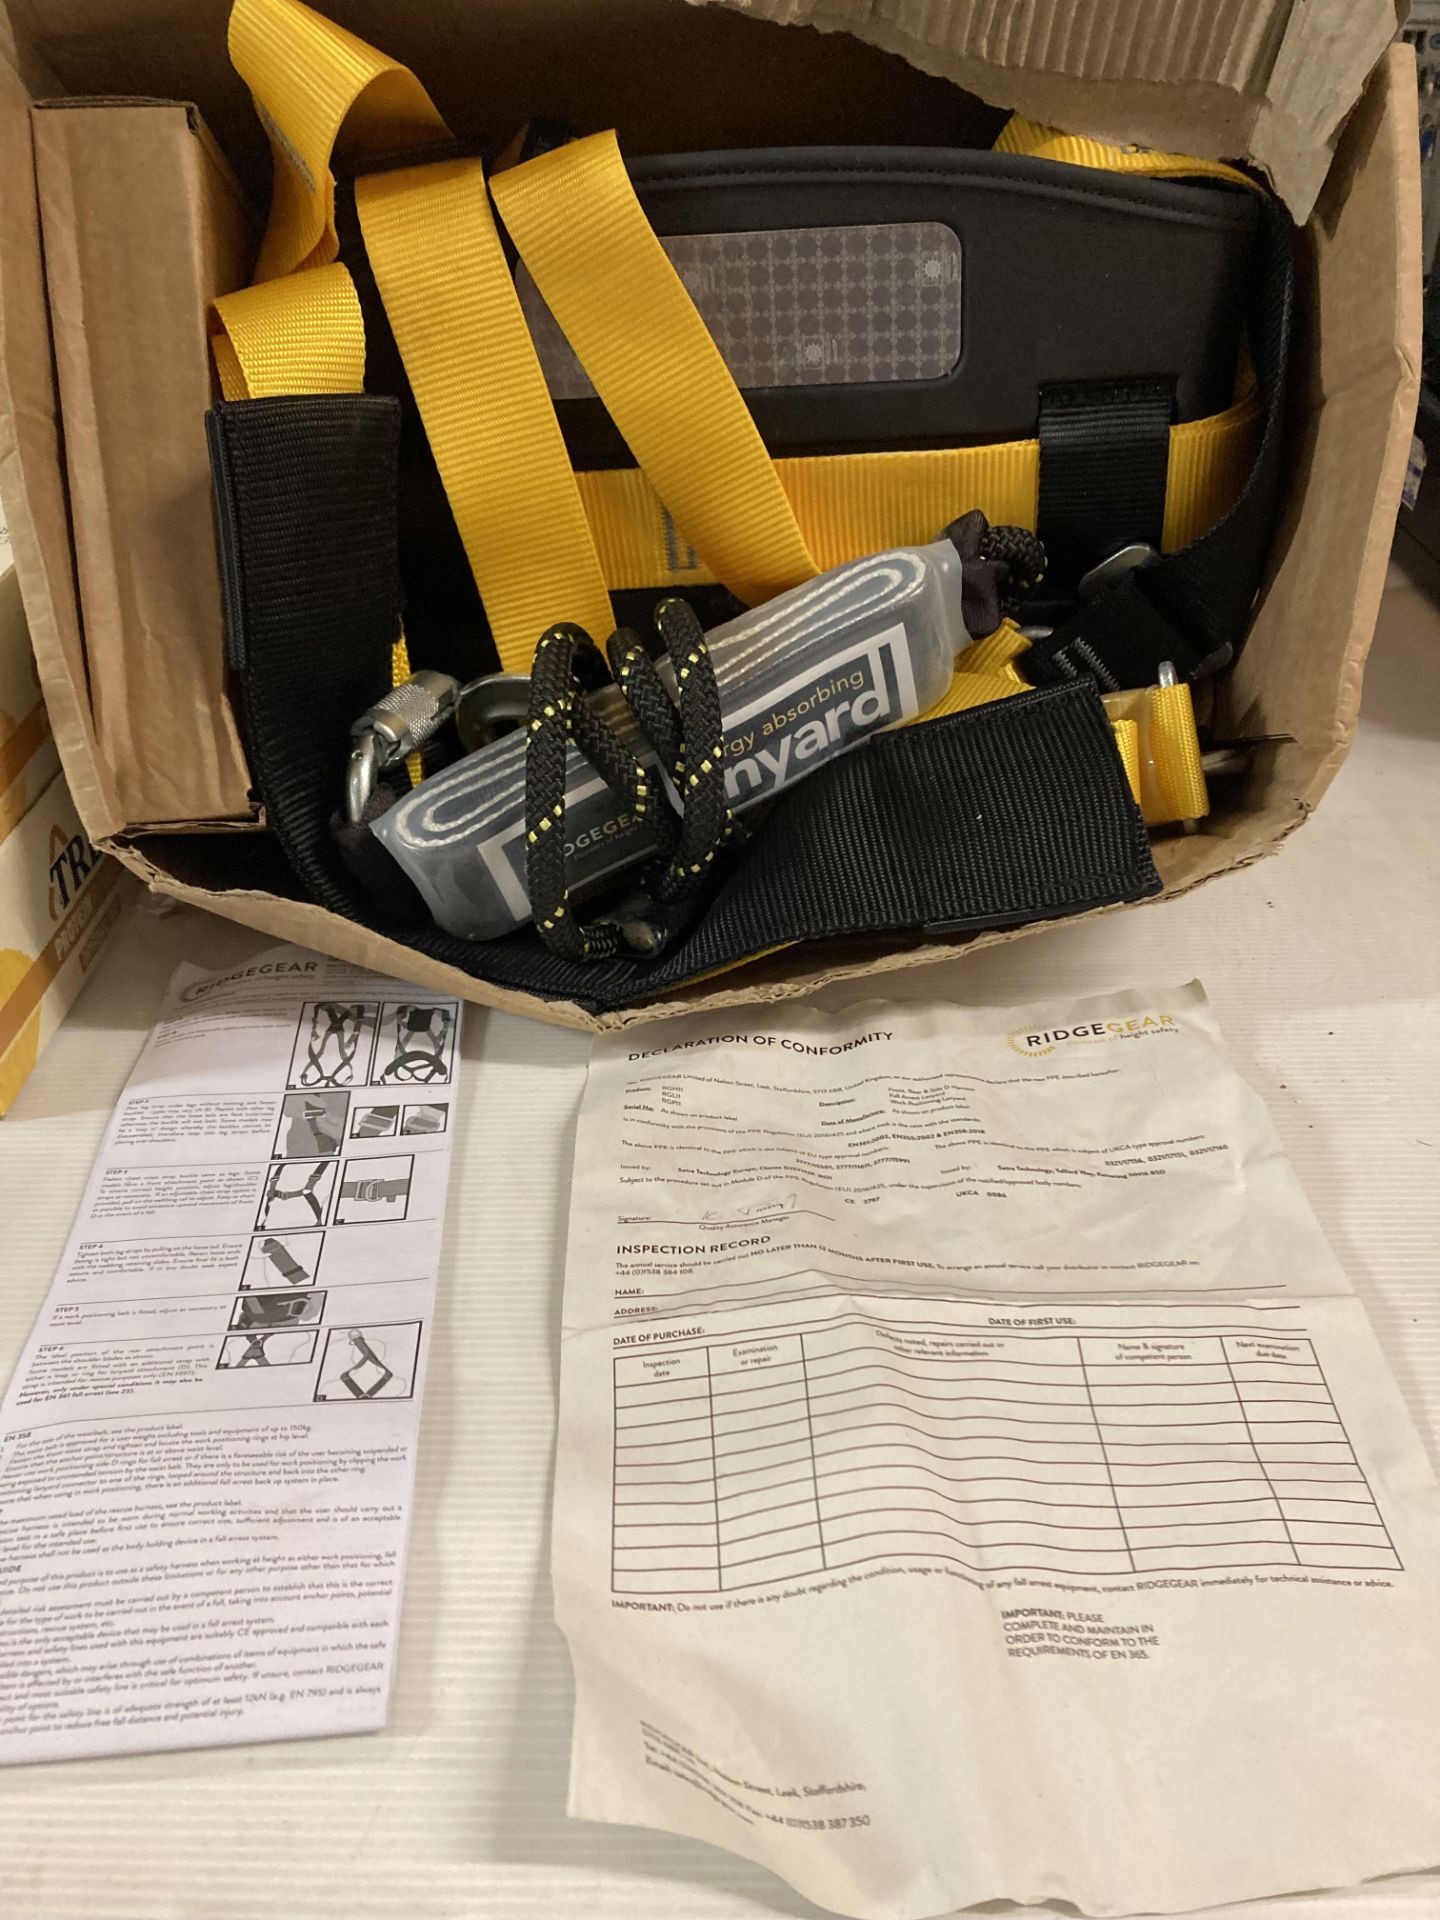 Ridgegear safety harness with instruction manual and declaration of conformity (saleroom location: